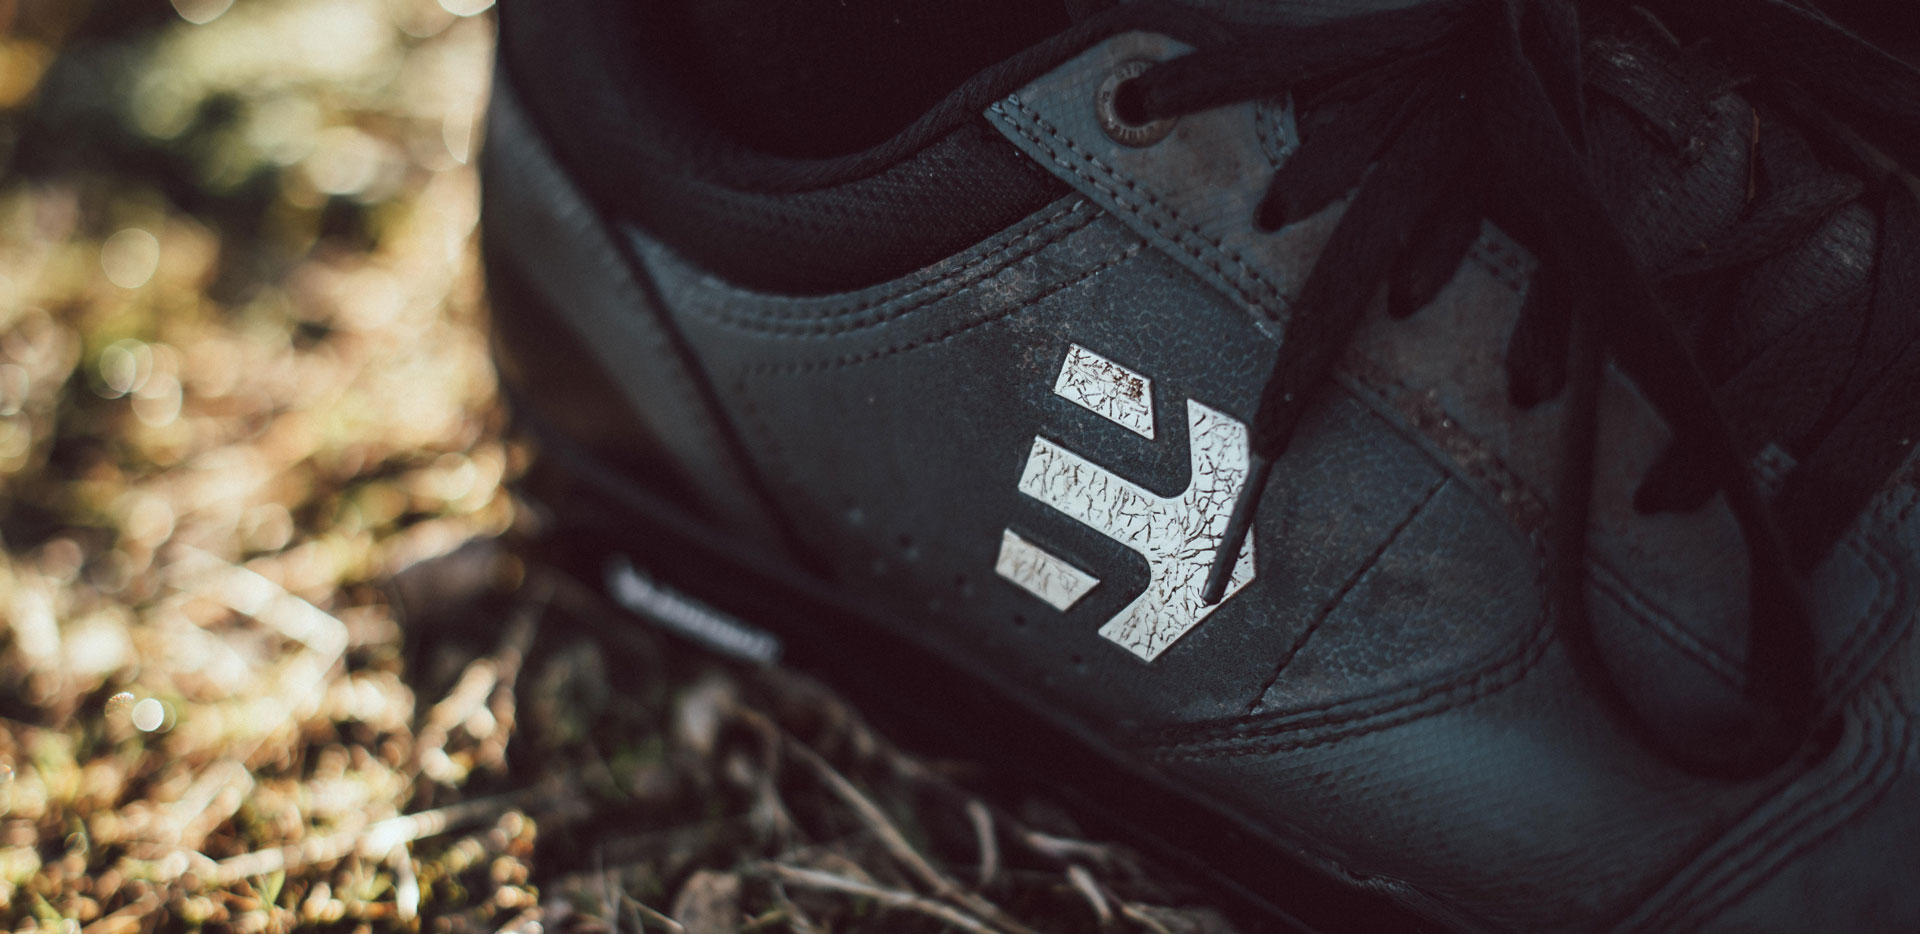 Review: Etnies Camber Crank Shoes - The Loam Wolf